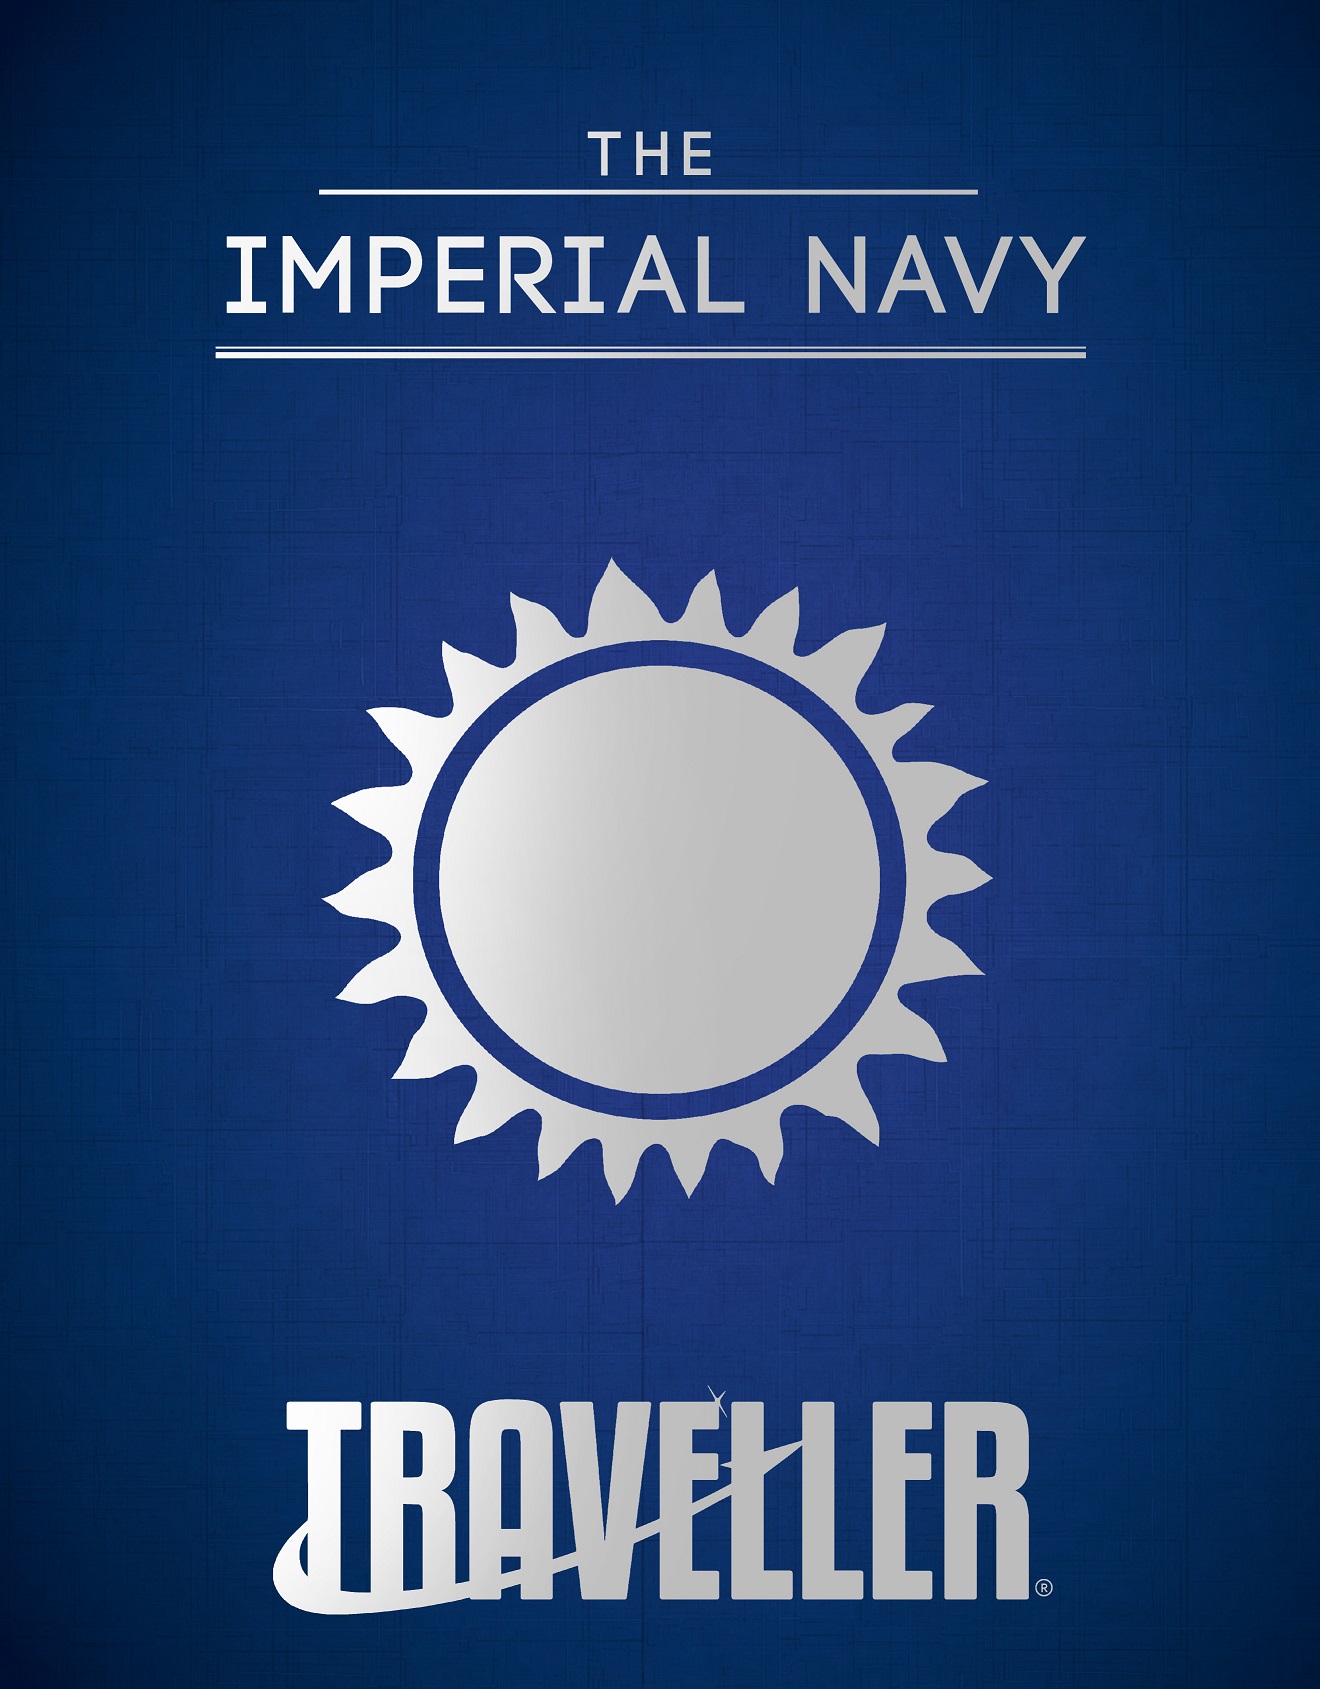 THE IMPERIAL NAVY EBOOK COVER.jpg